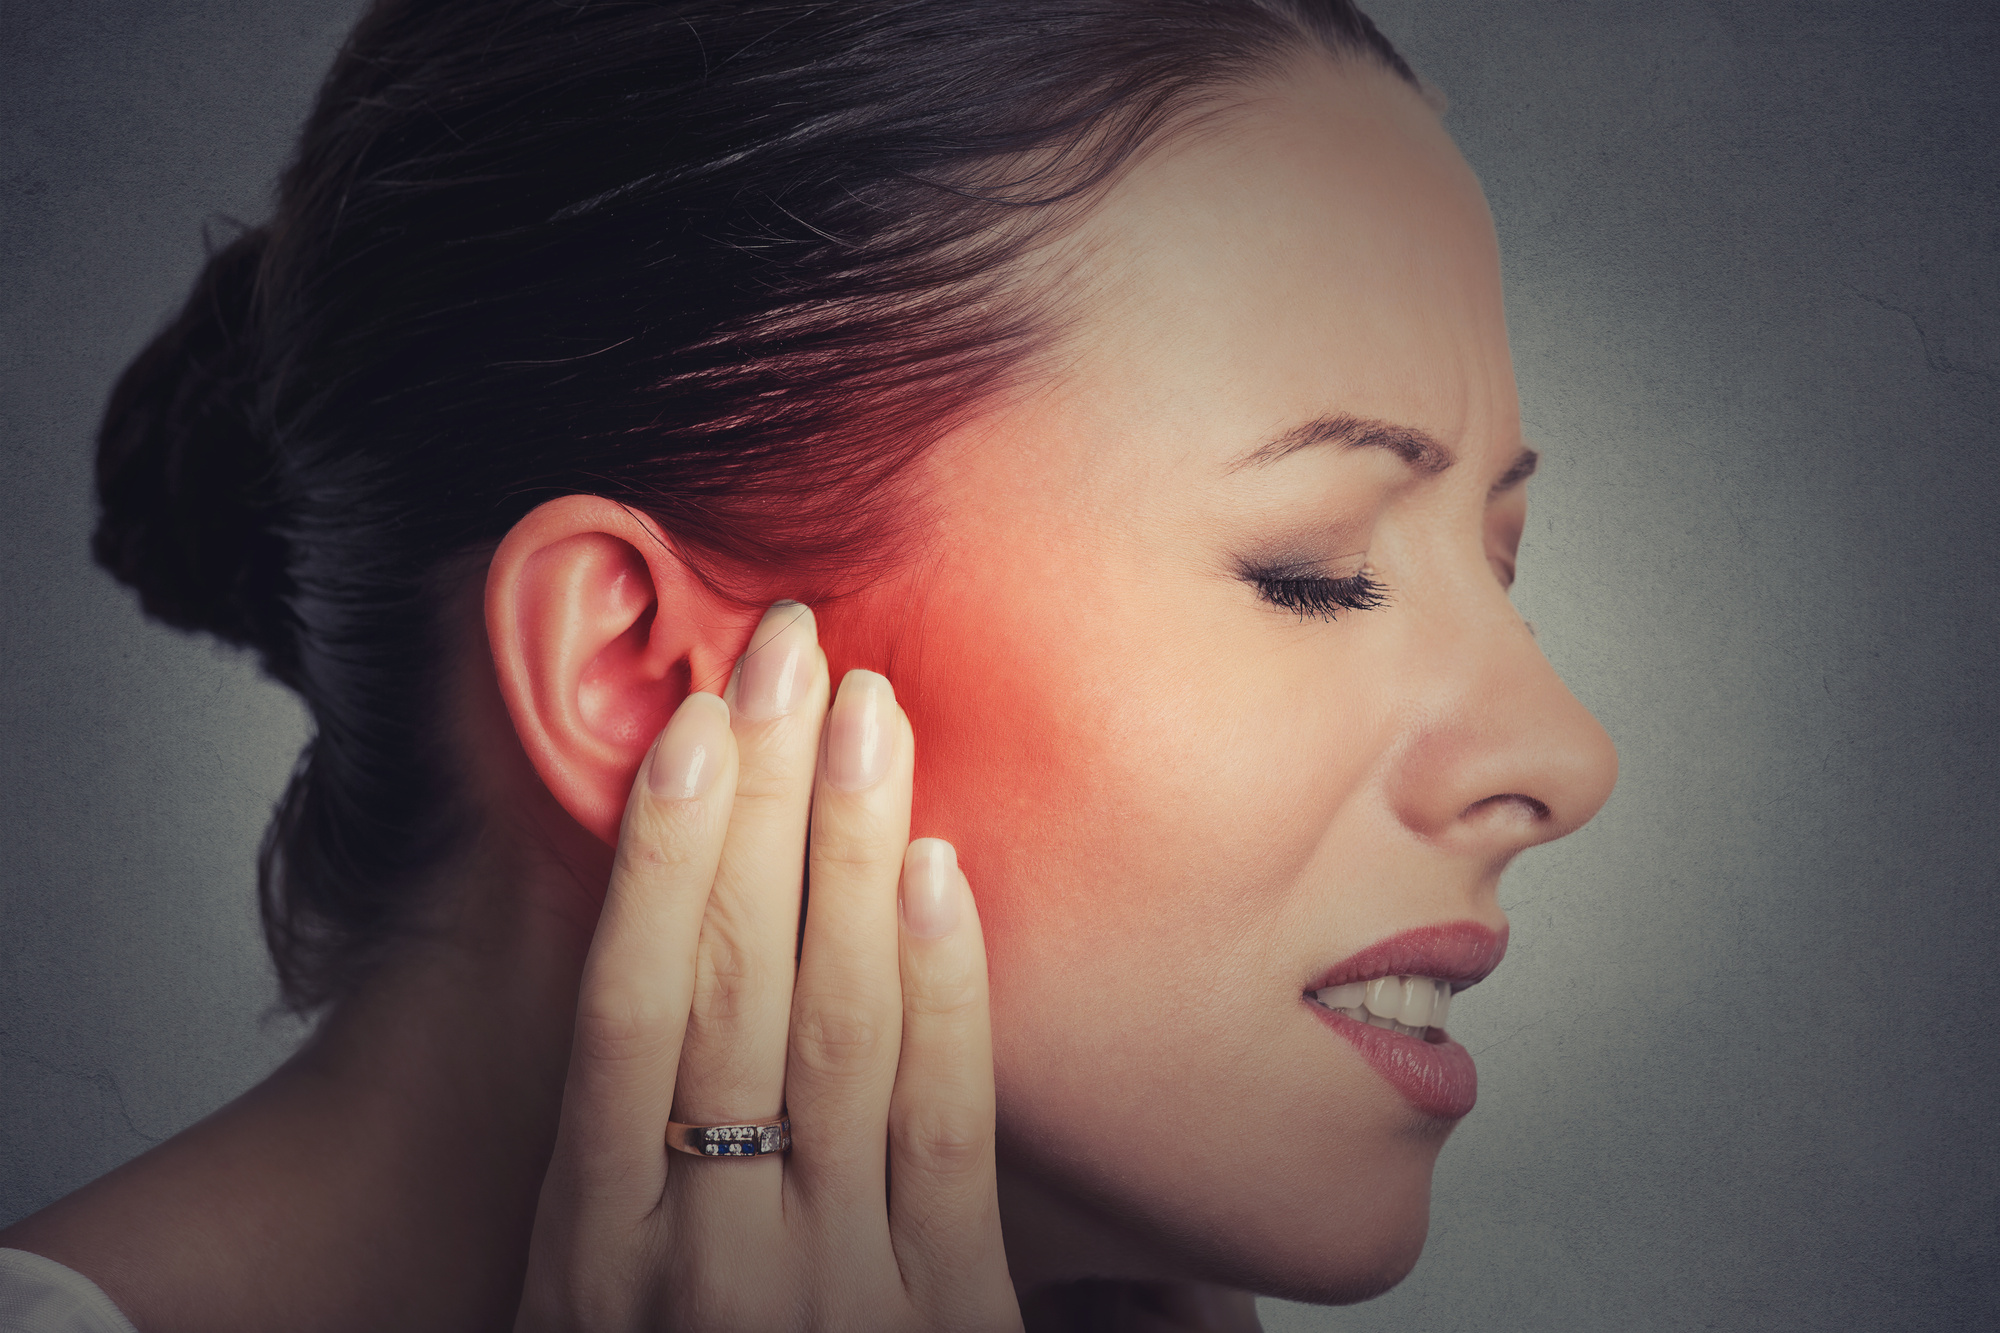 Get Rid of an Ear Infection Fast